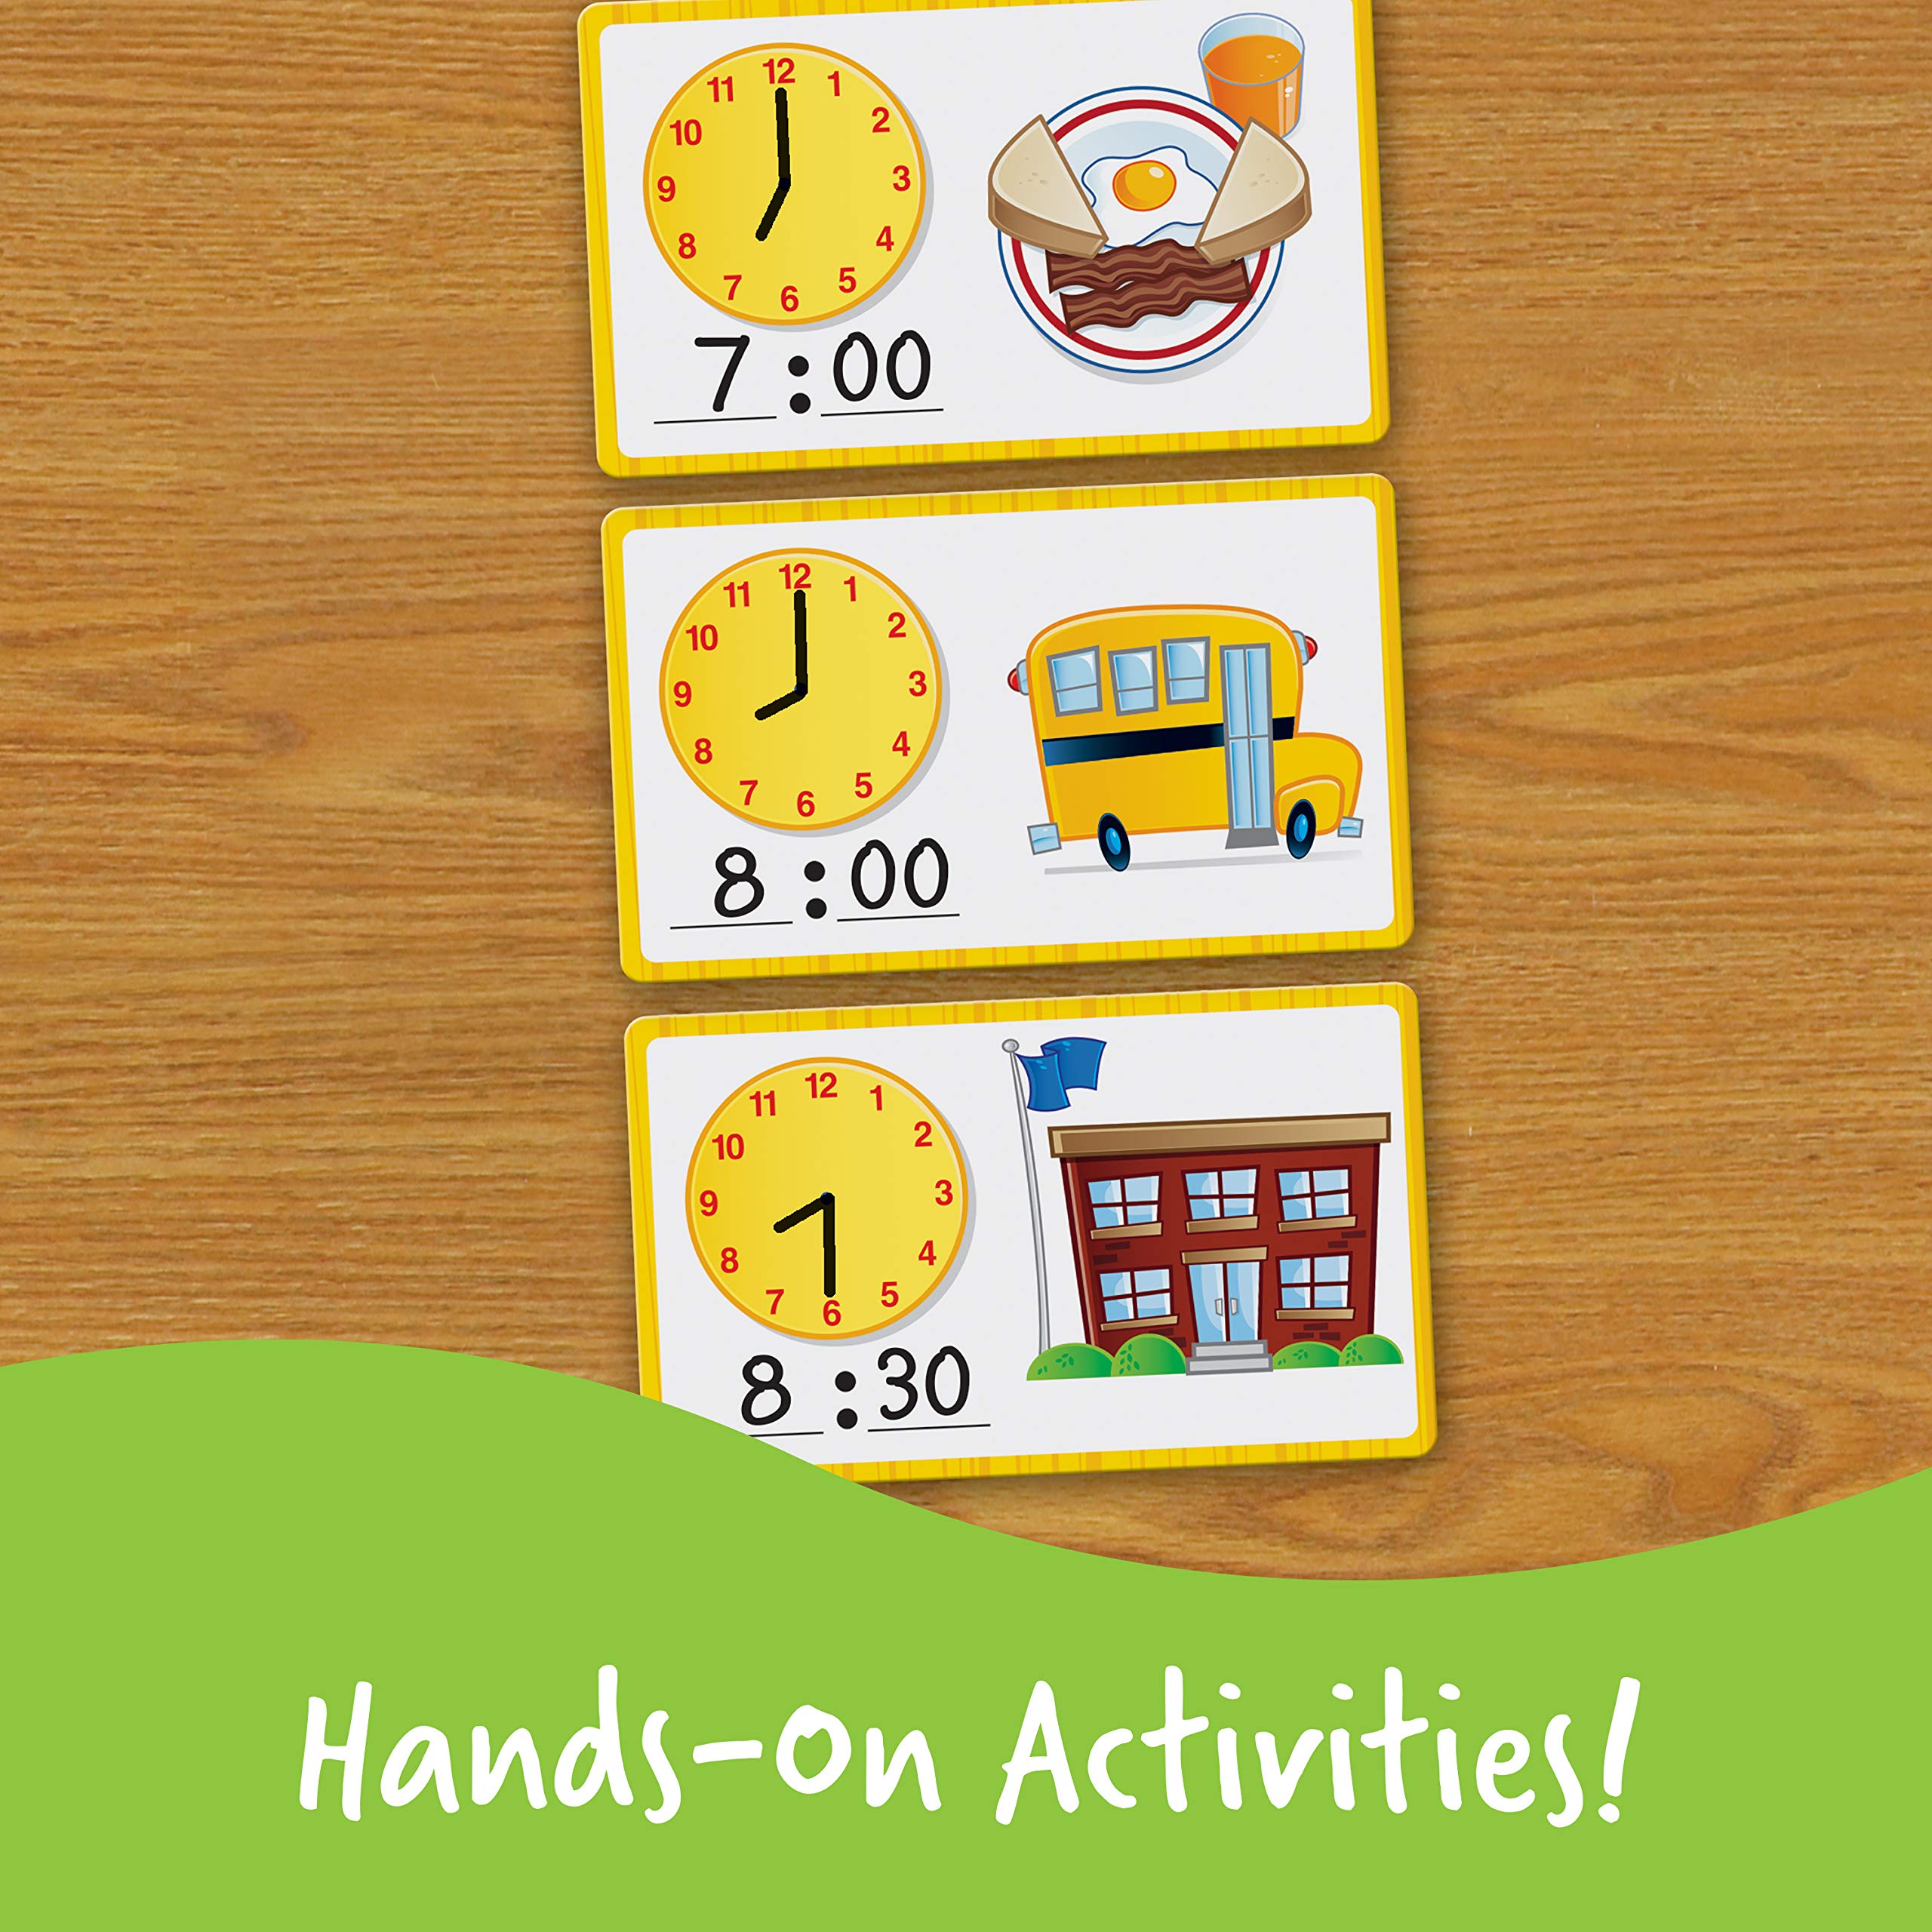 Learning Resources Time Activity Set - 41 Pieces, Ages 5+,Clock for Teaching Time, Telling Time, Homeschool Supplies, Montessori Clock,Back to School